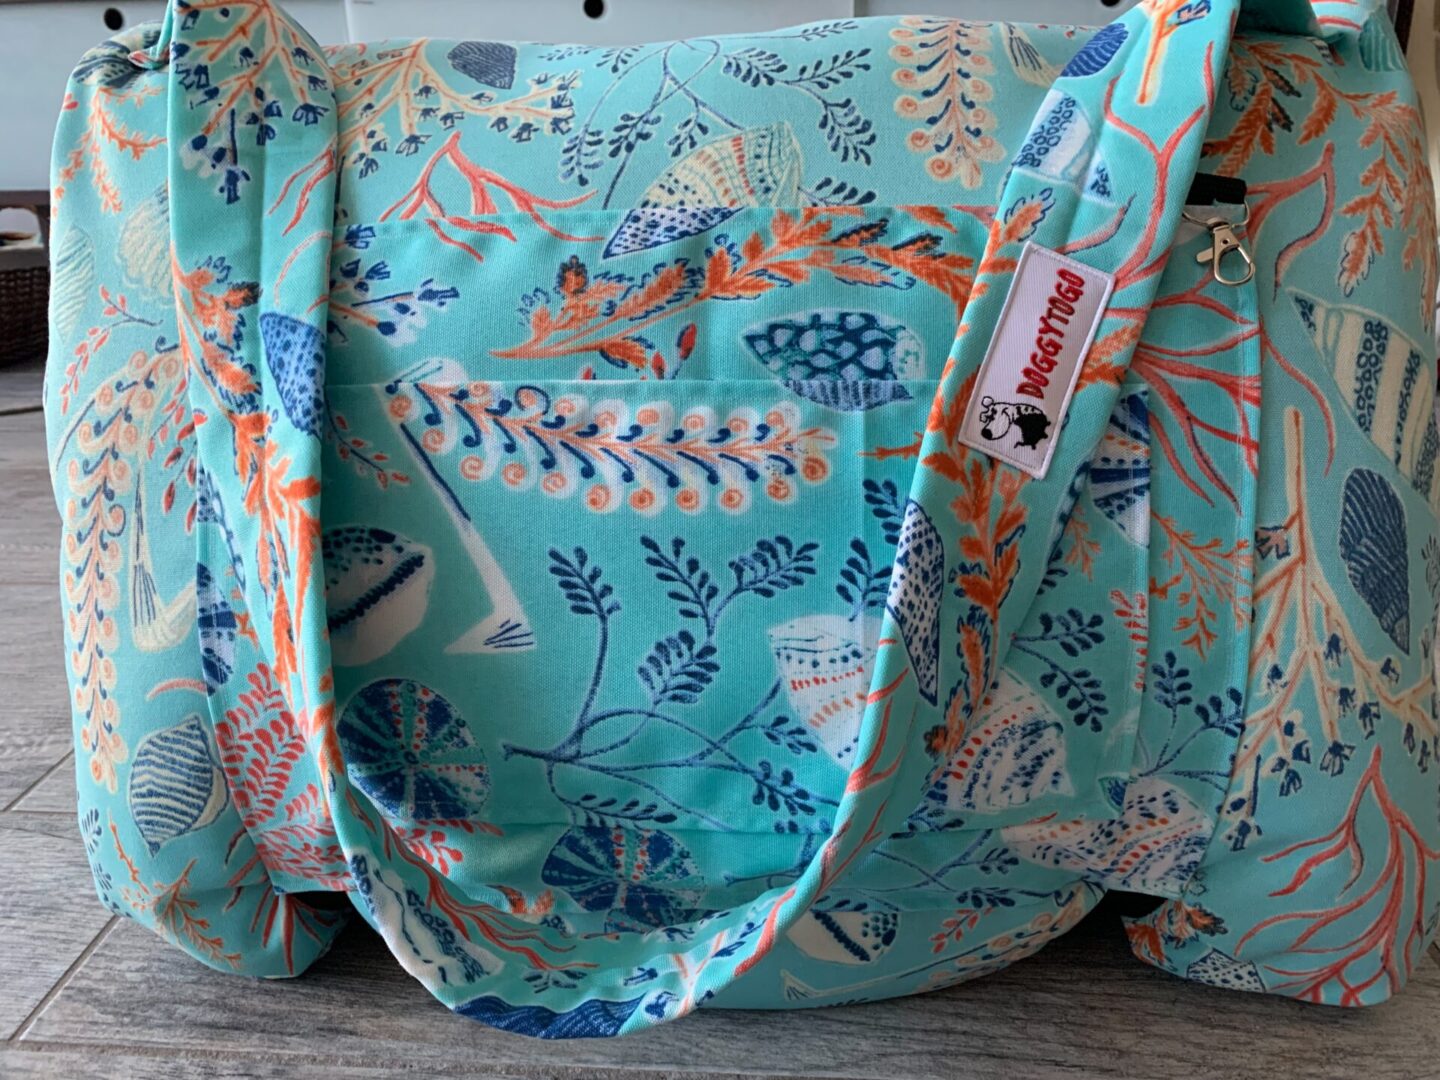 A small image of a blue dog bed bag with multicolor designs